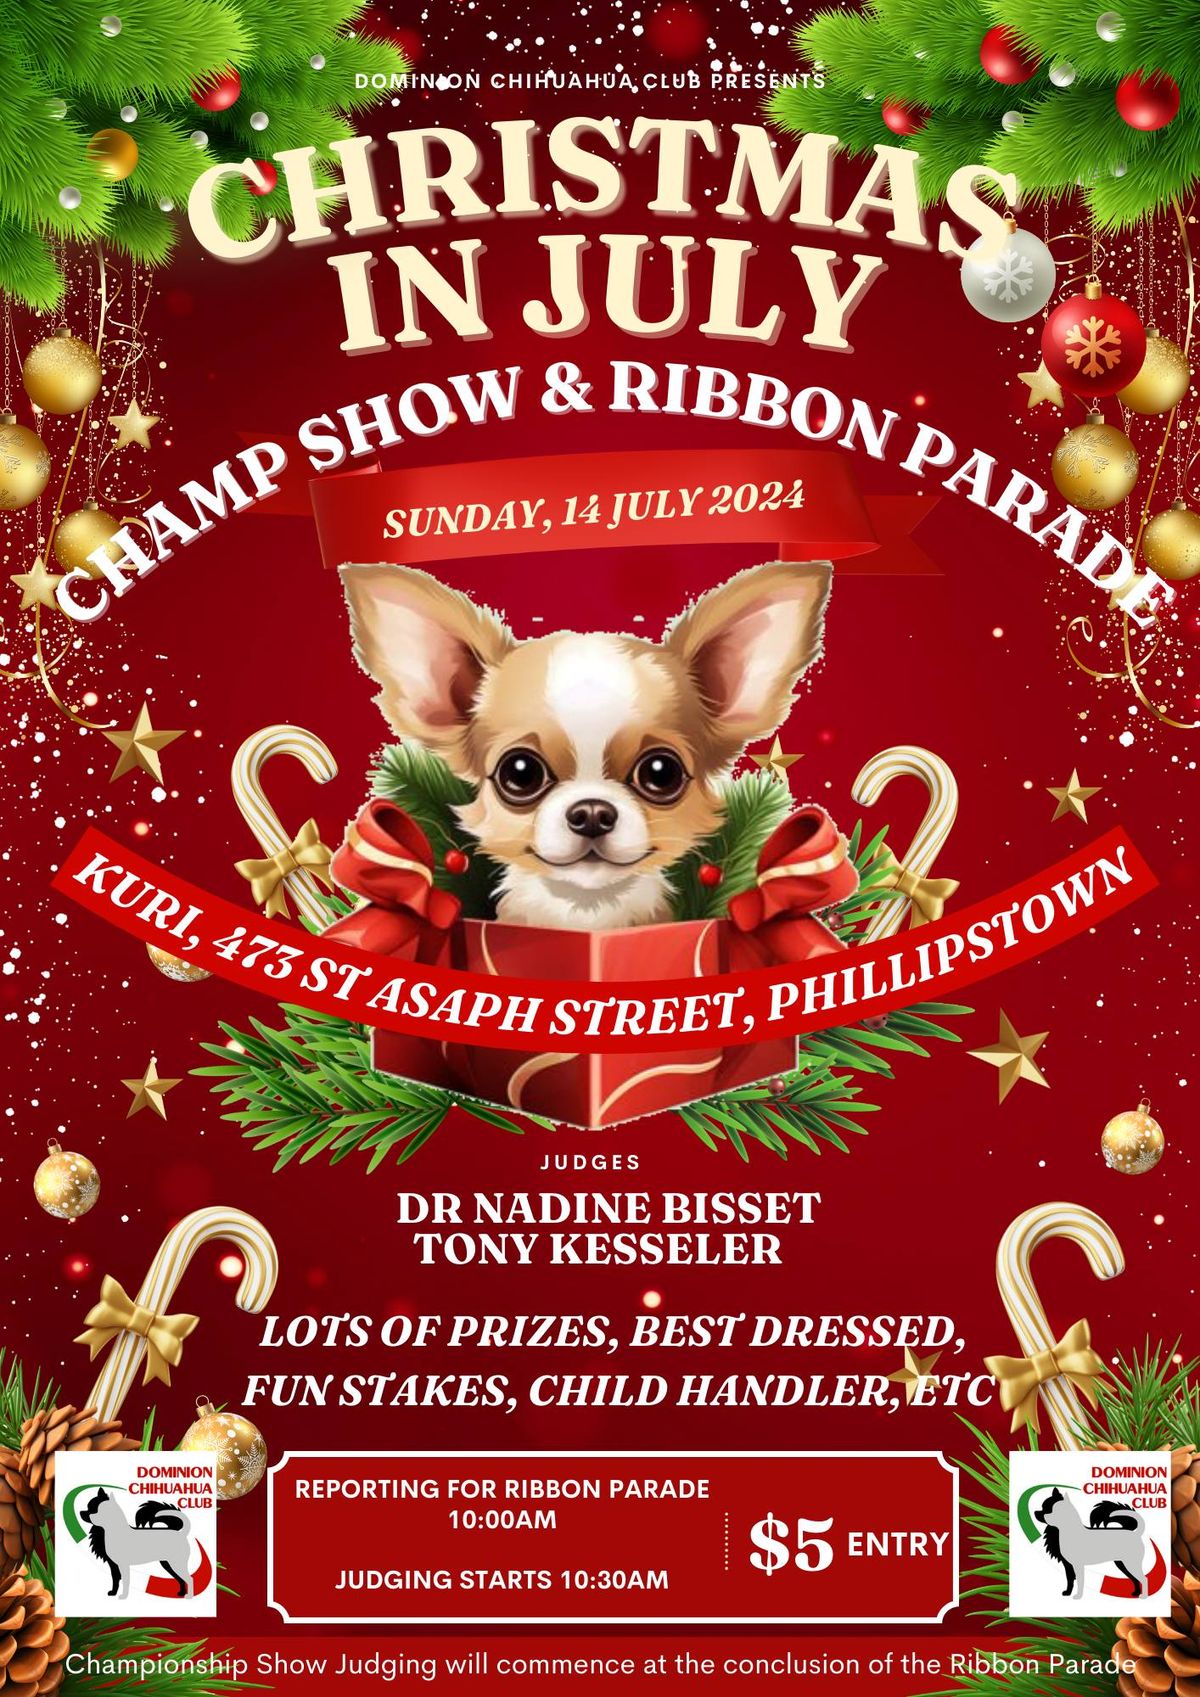 Christmas in July Champ Show and Ribbon Parade